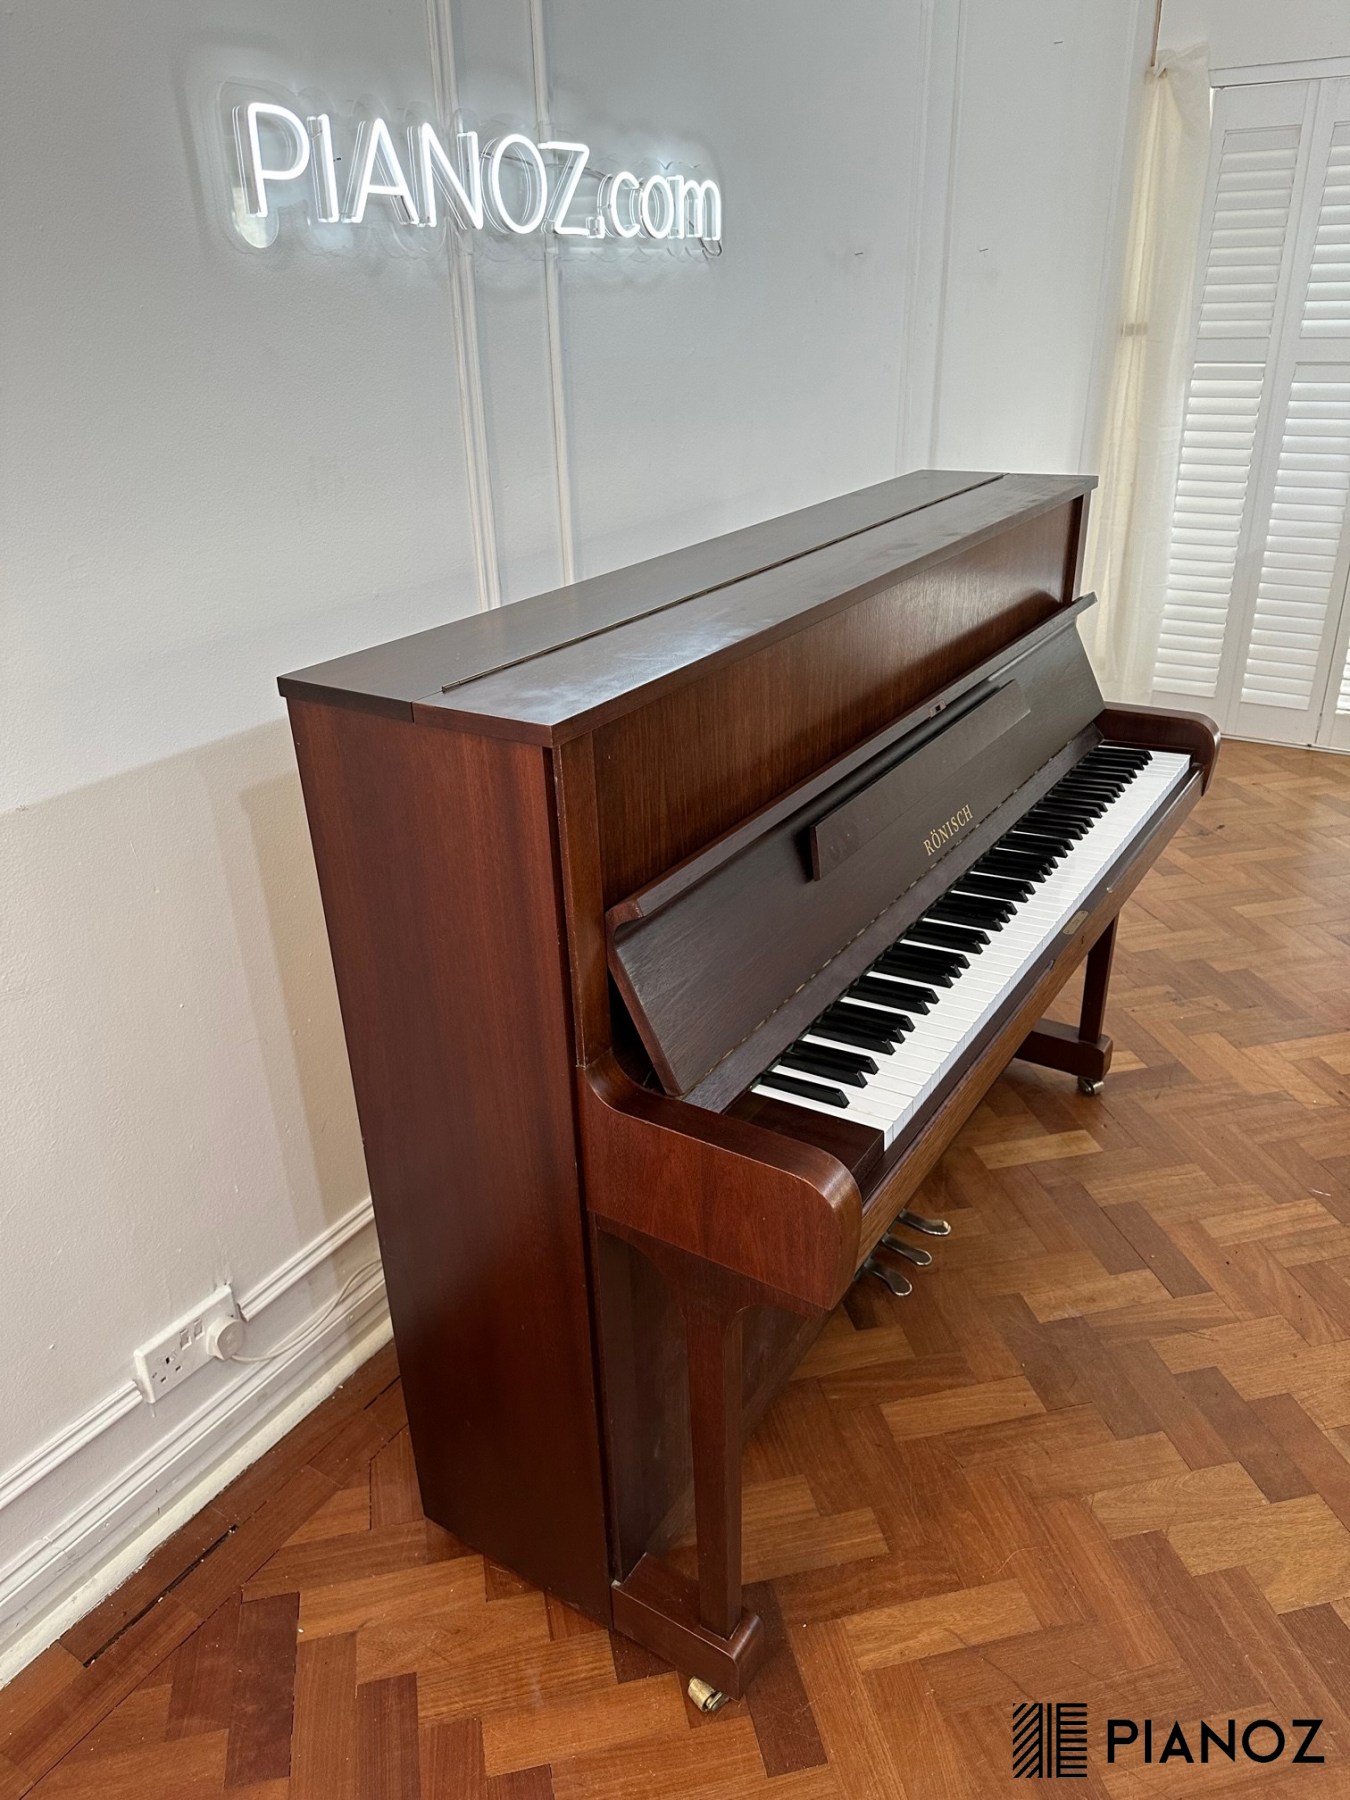 Ronisch 116 Upright Piano piano for sale in UK